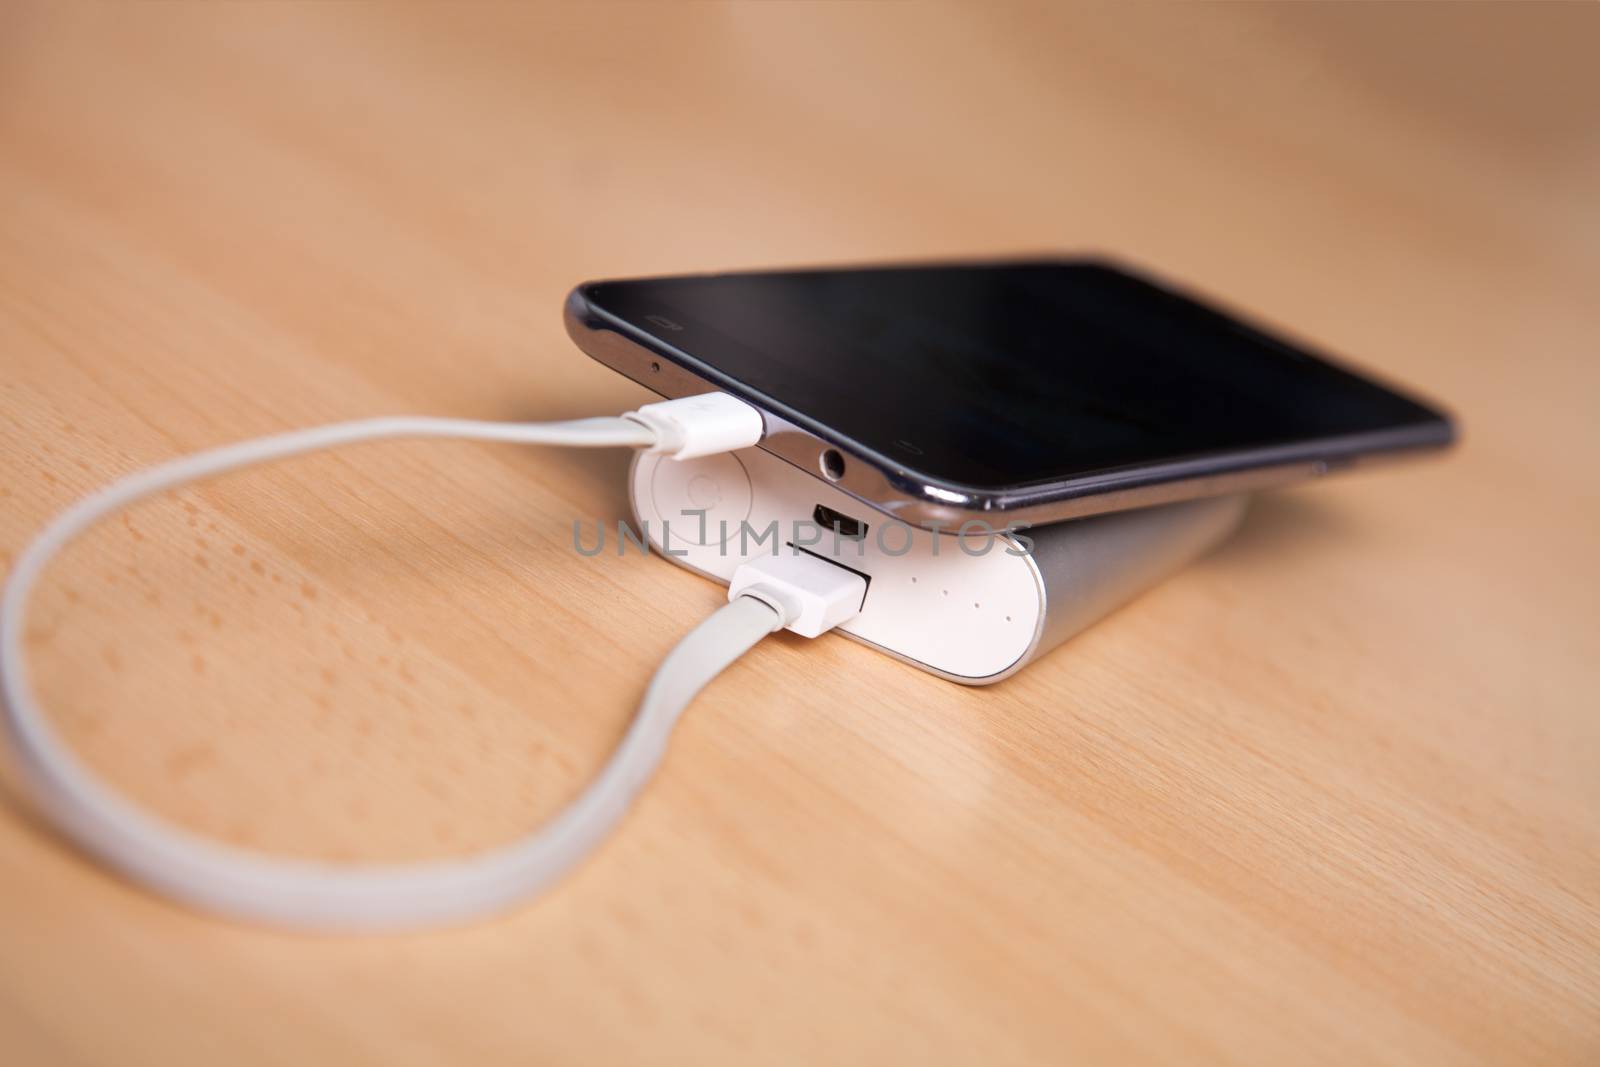 Mobile Phone Charging With Power Bank on wooden table